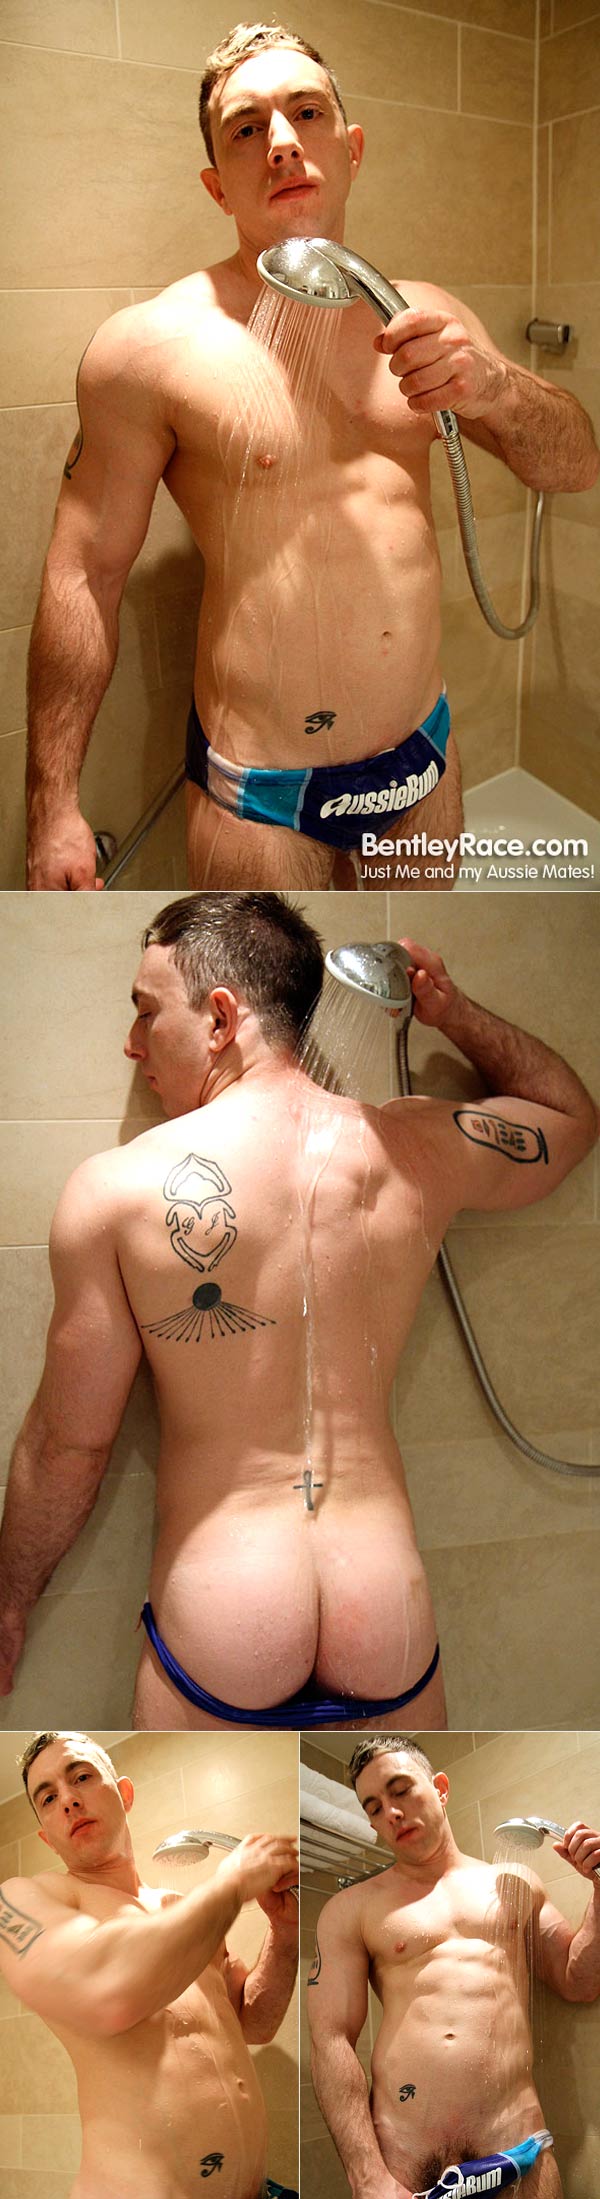 Victor Crave (In the Shower) at Bentley Race